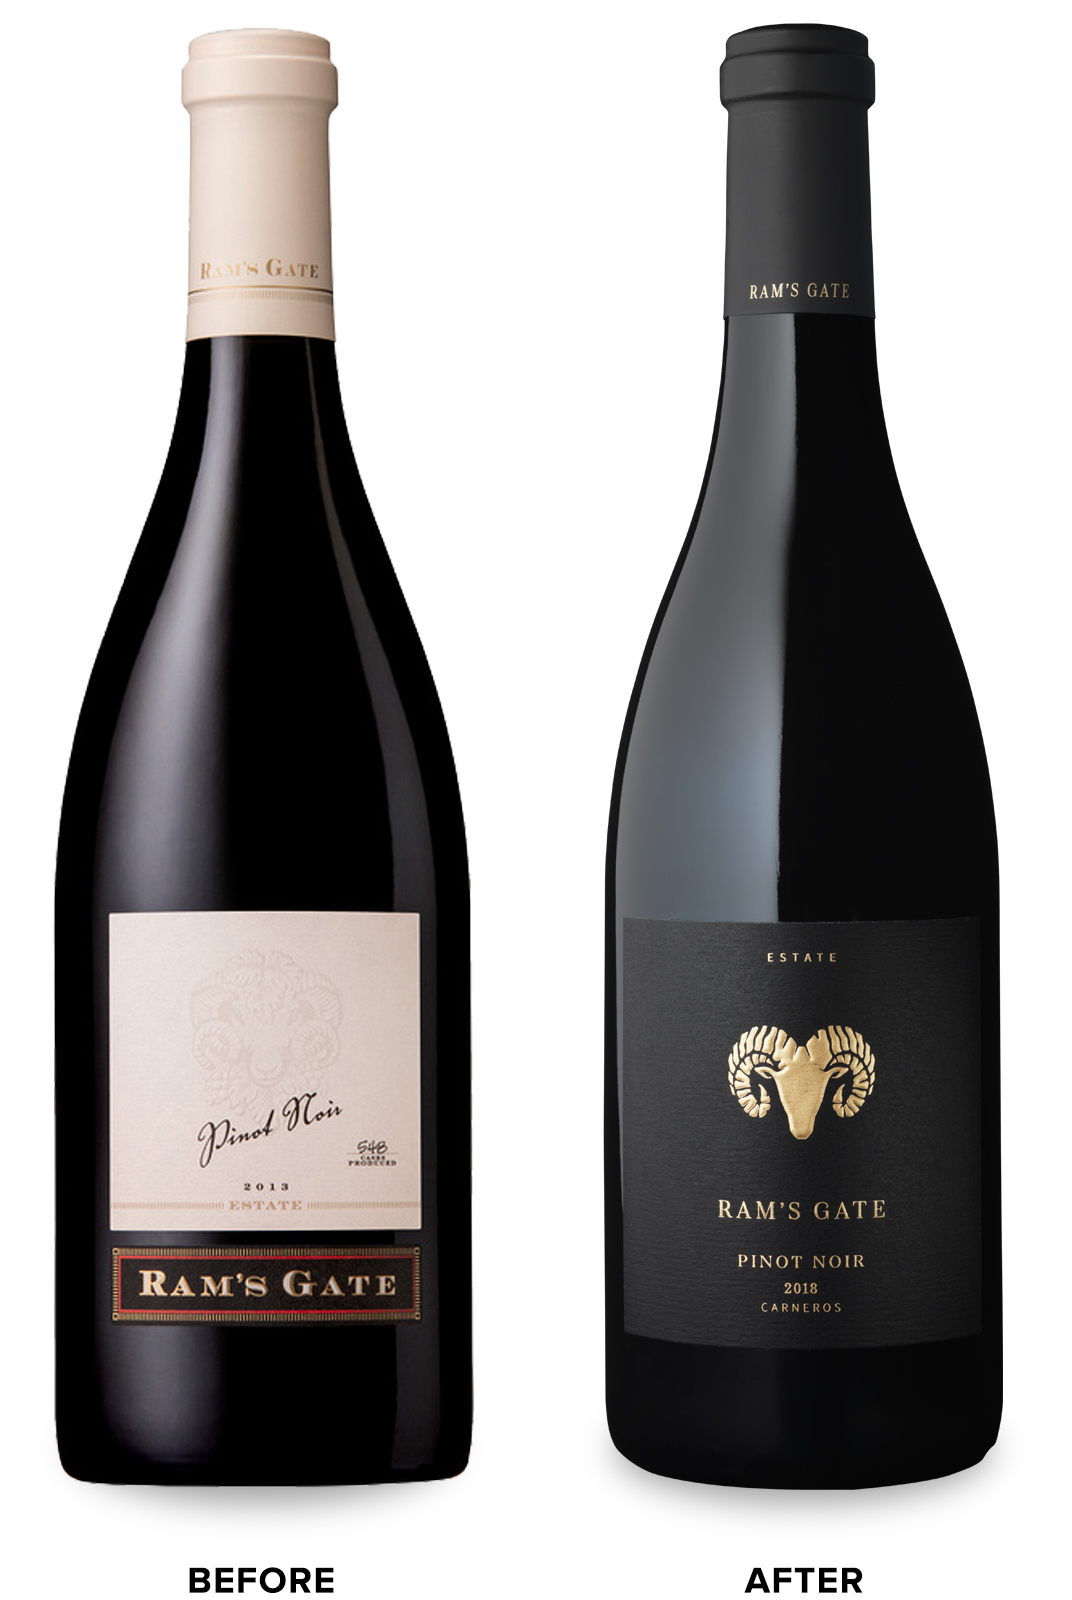 Ram’s Gate Estate Tier Wine Packaging Before Redesign on Left & After on Right